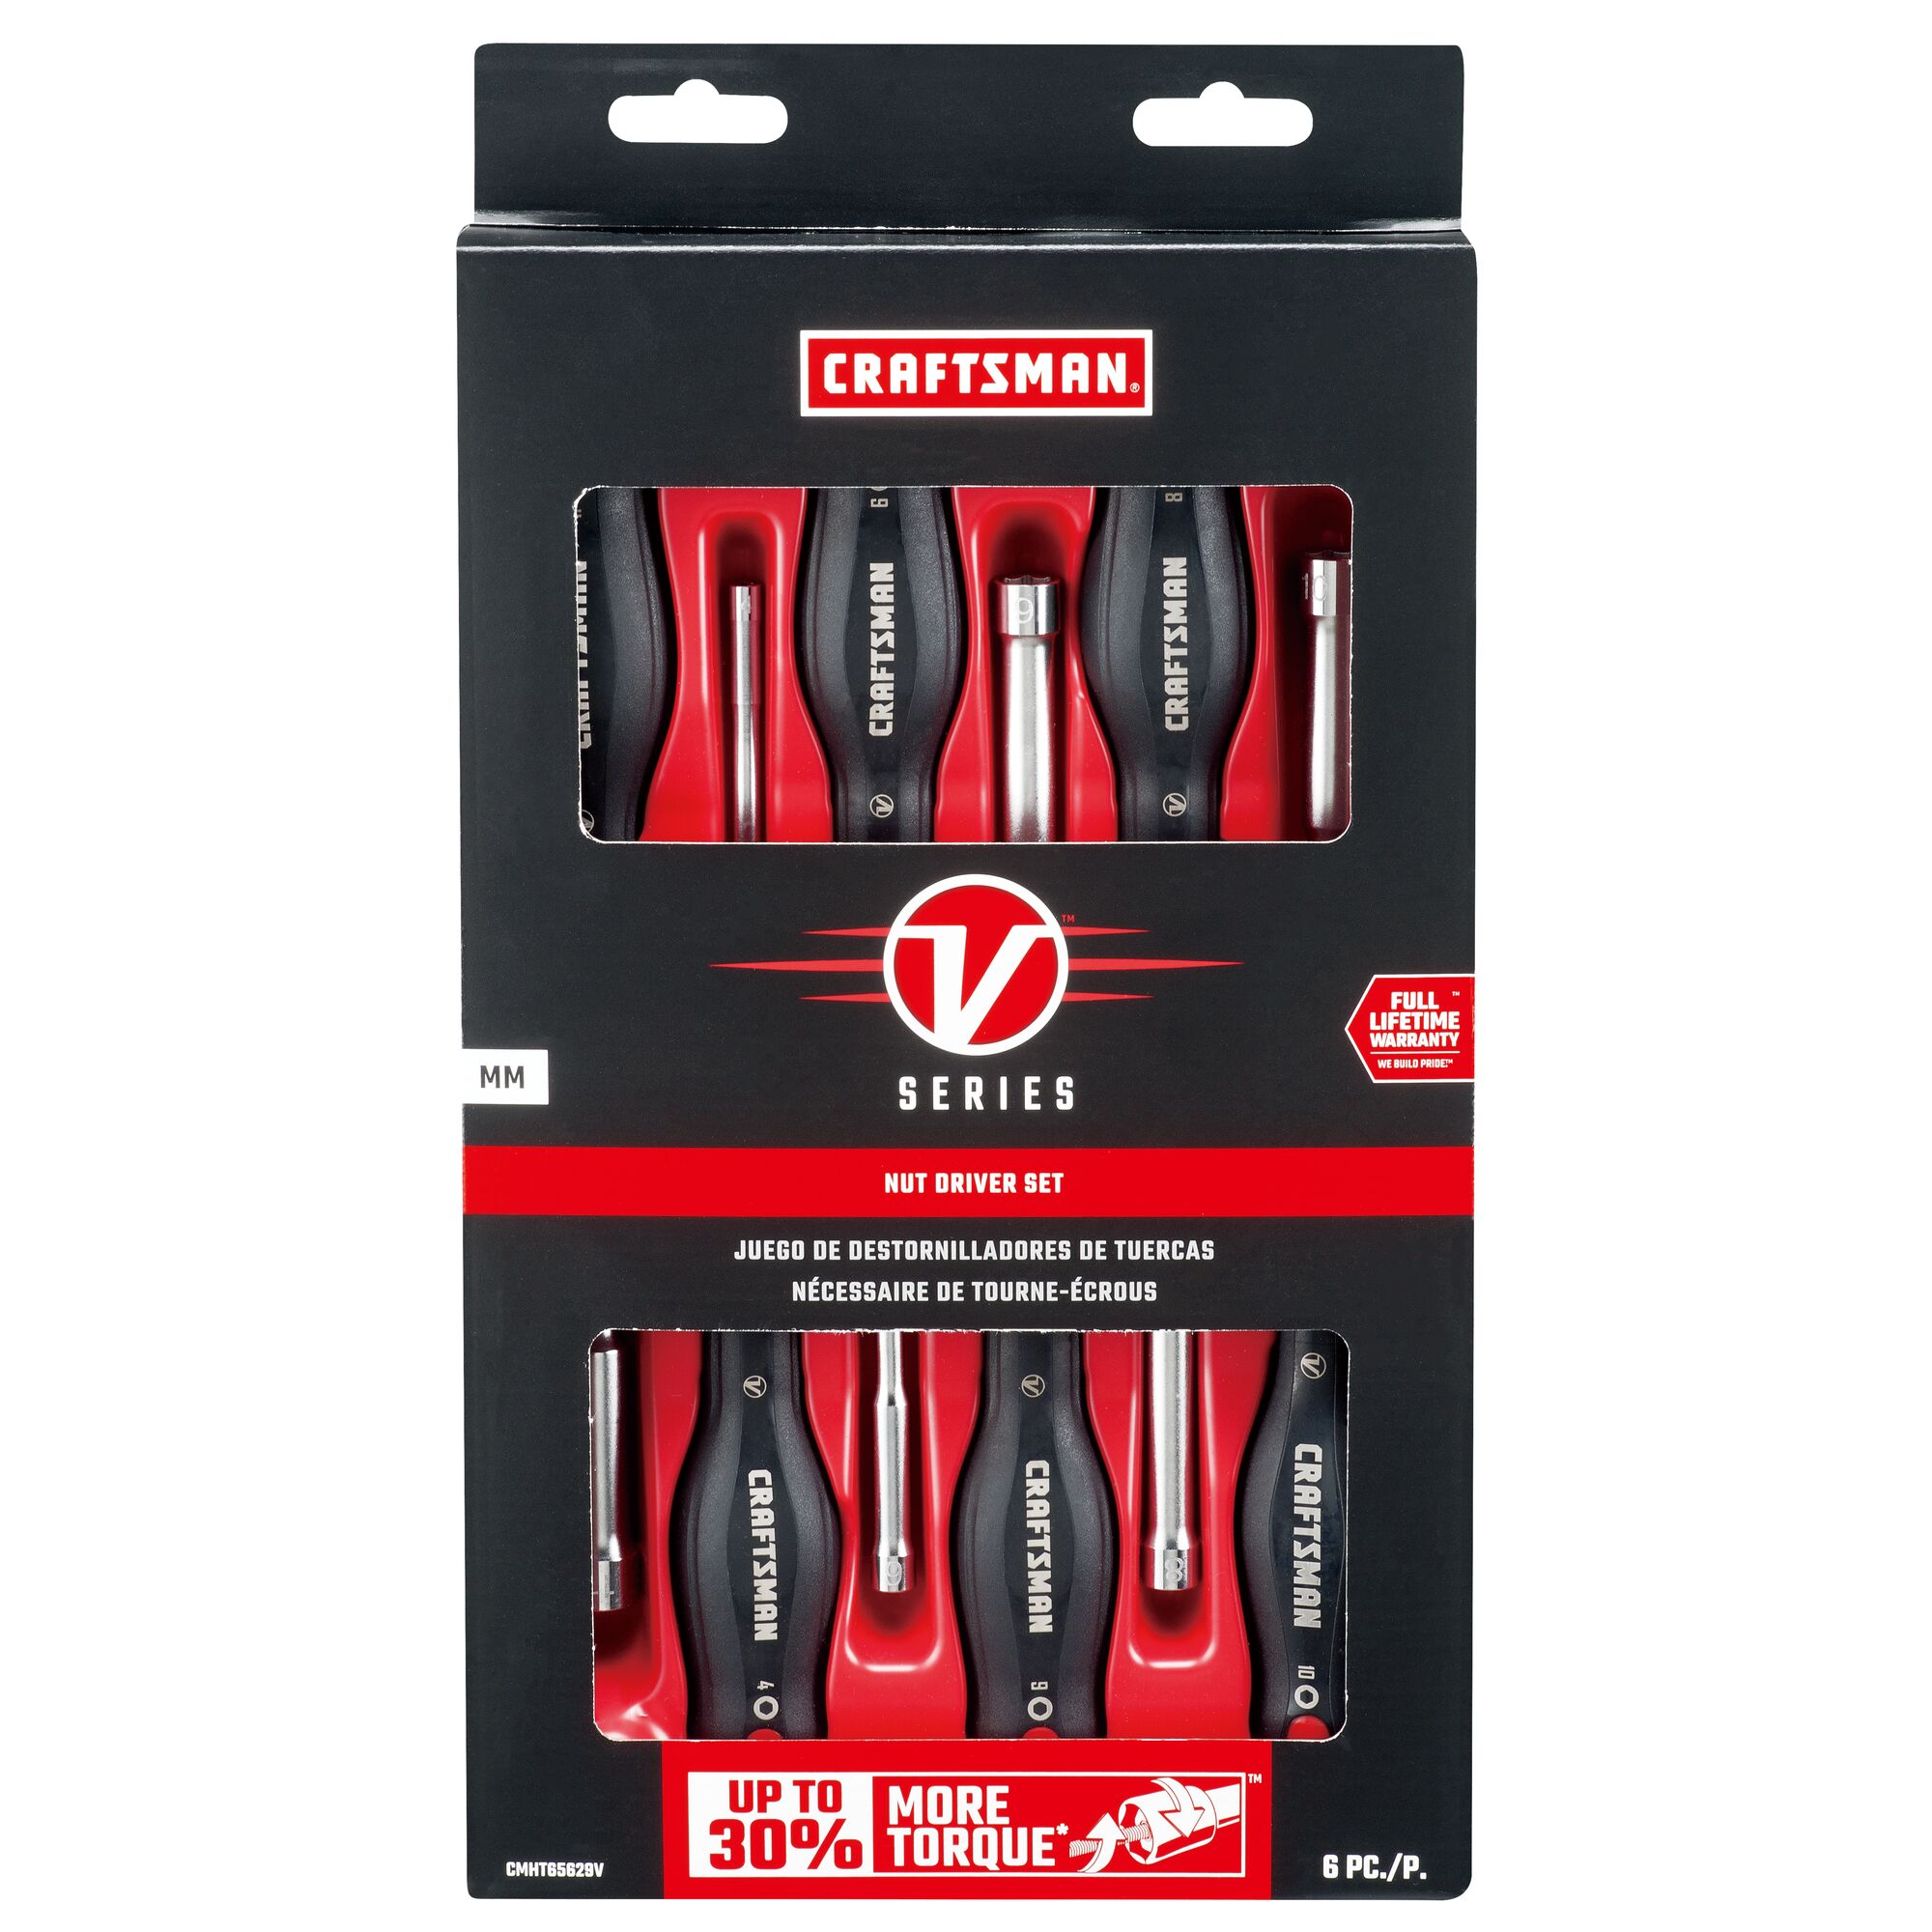 V Series 6 piece Metric Nut Driver Set in card box packaging.